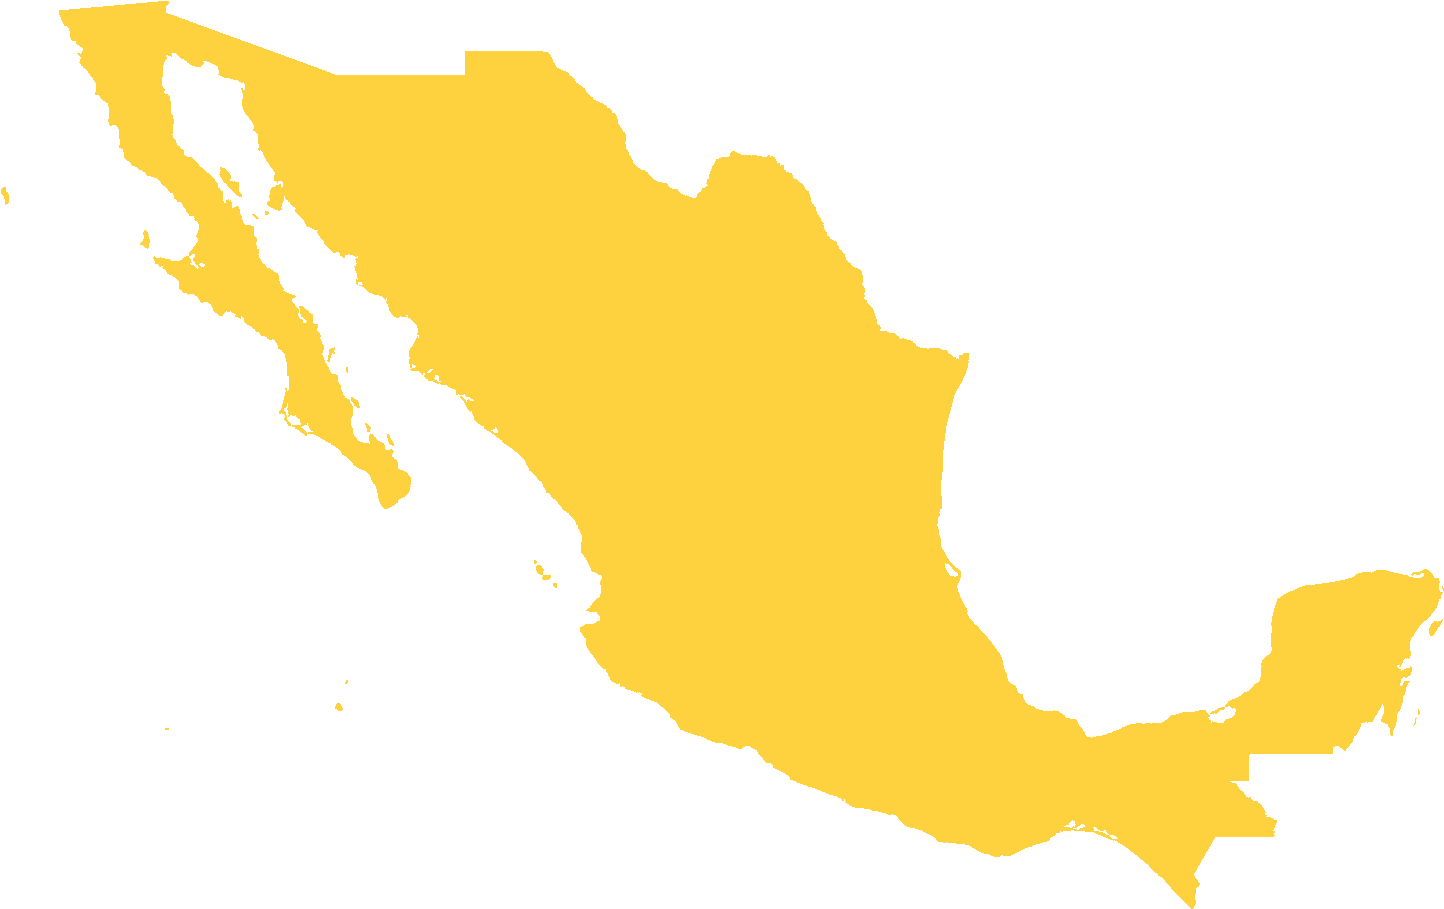 Mexico With No Background (1471x950)